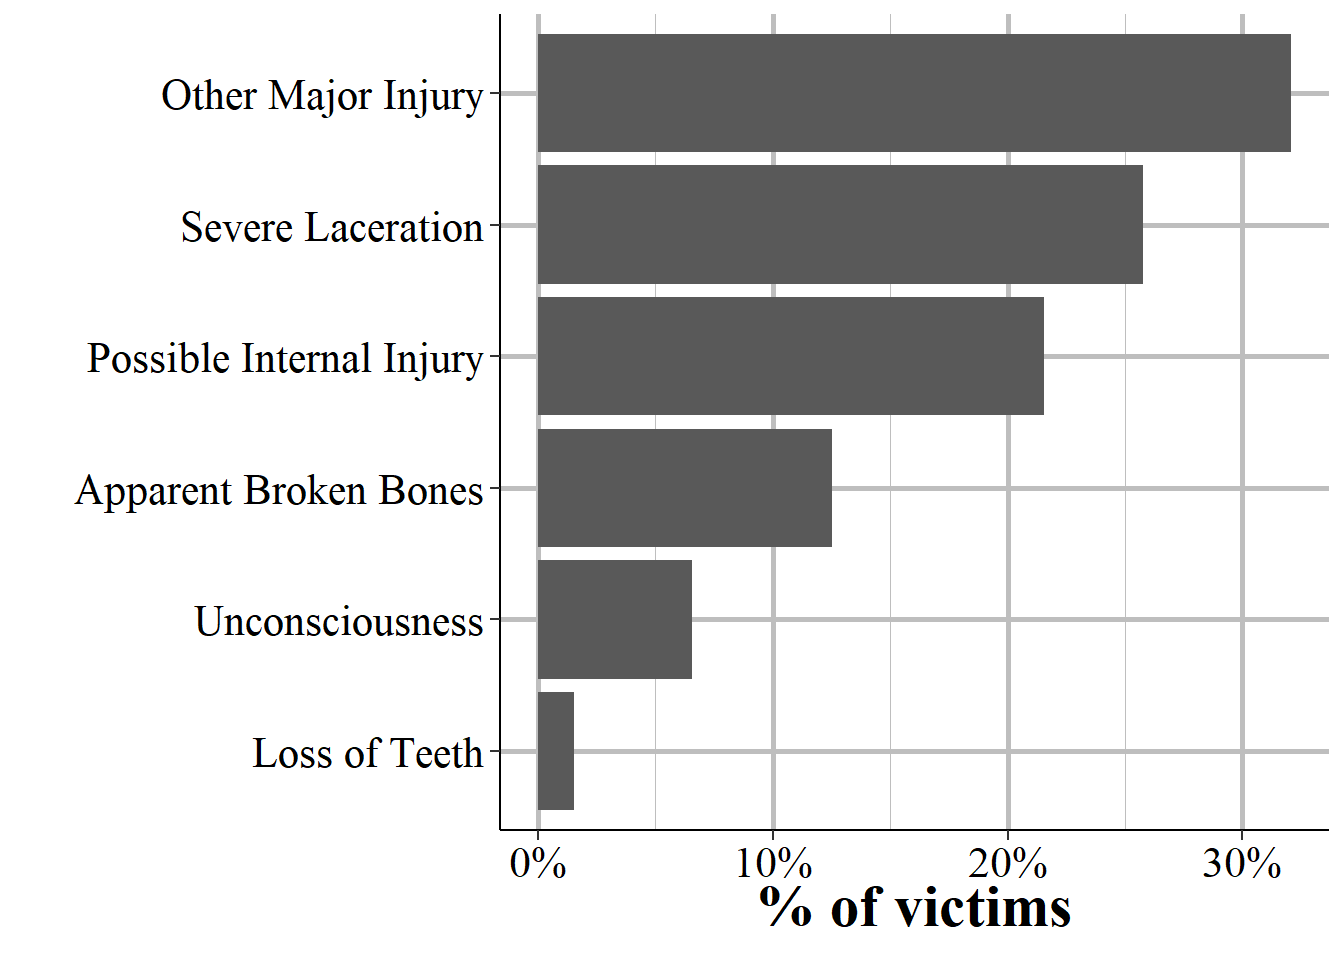 The distribution of the injury sustained by the victim for those who had an injury other than 'none' or 'apparent minor injuries'.